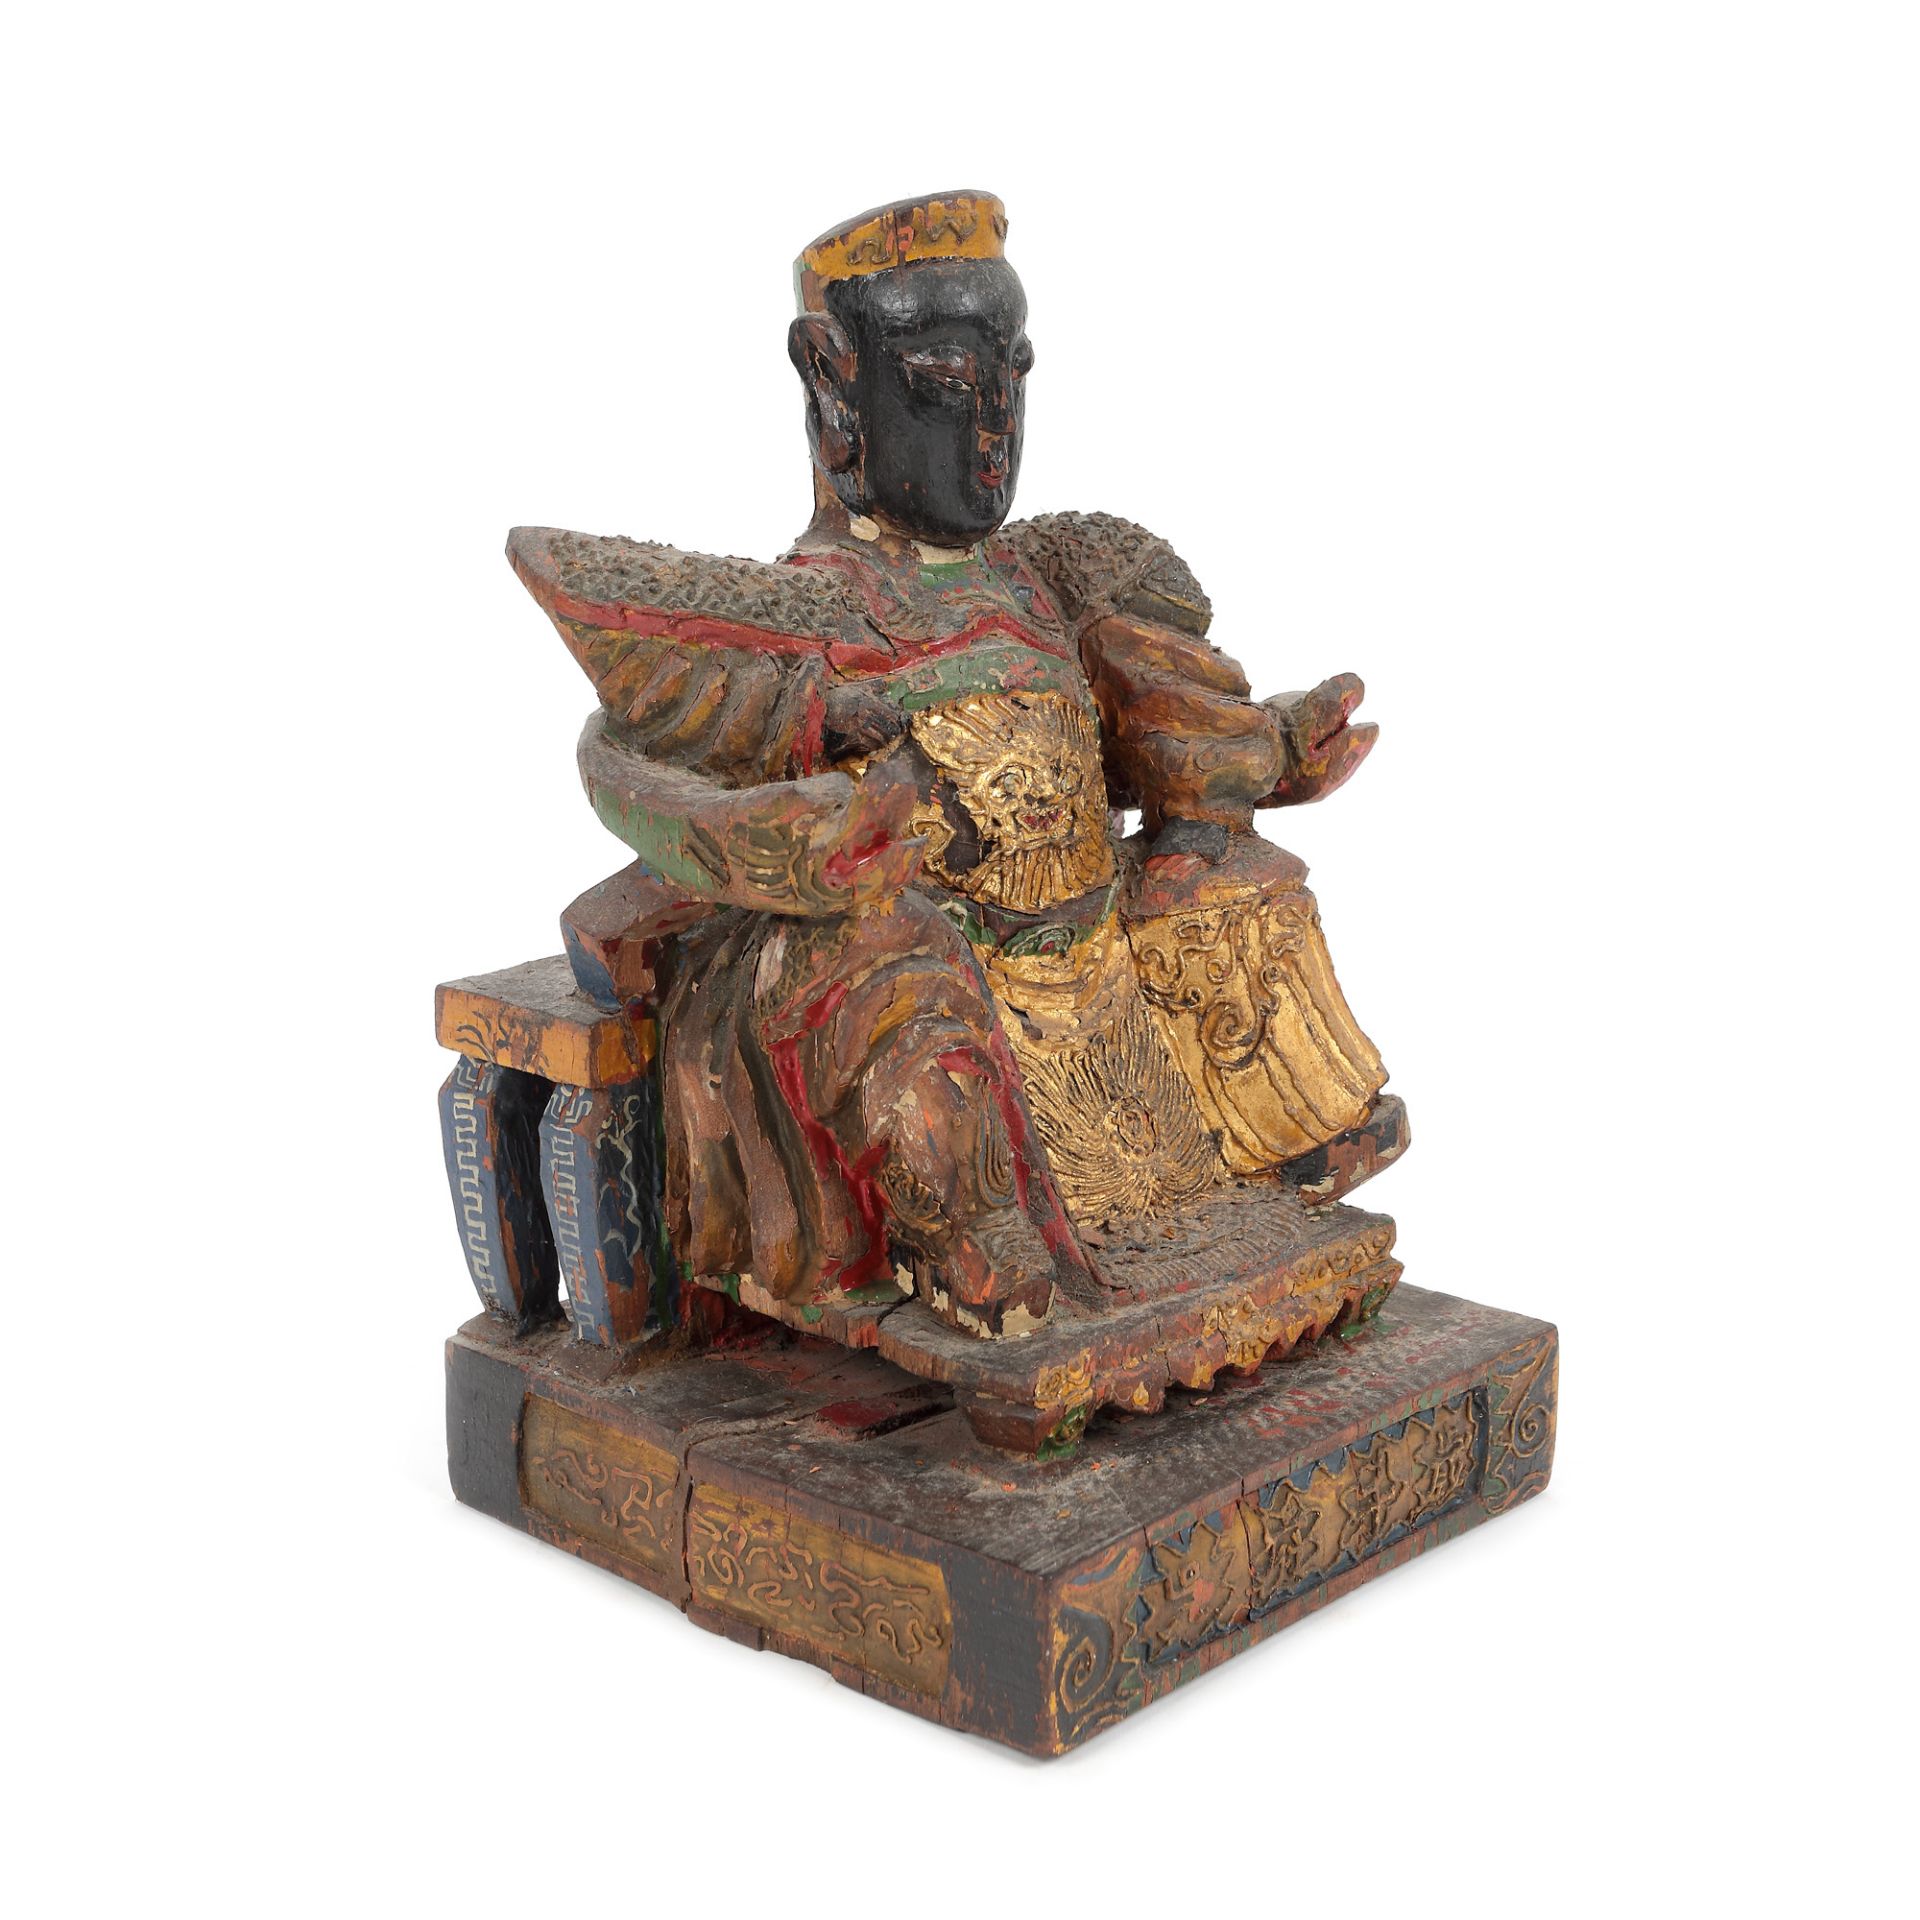 Statuette, painted wood, depicting a nobleman, Qing Dynasty, China, 19th century - Image 2 of 4